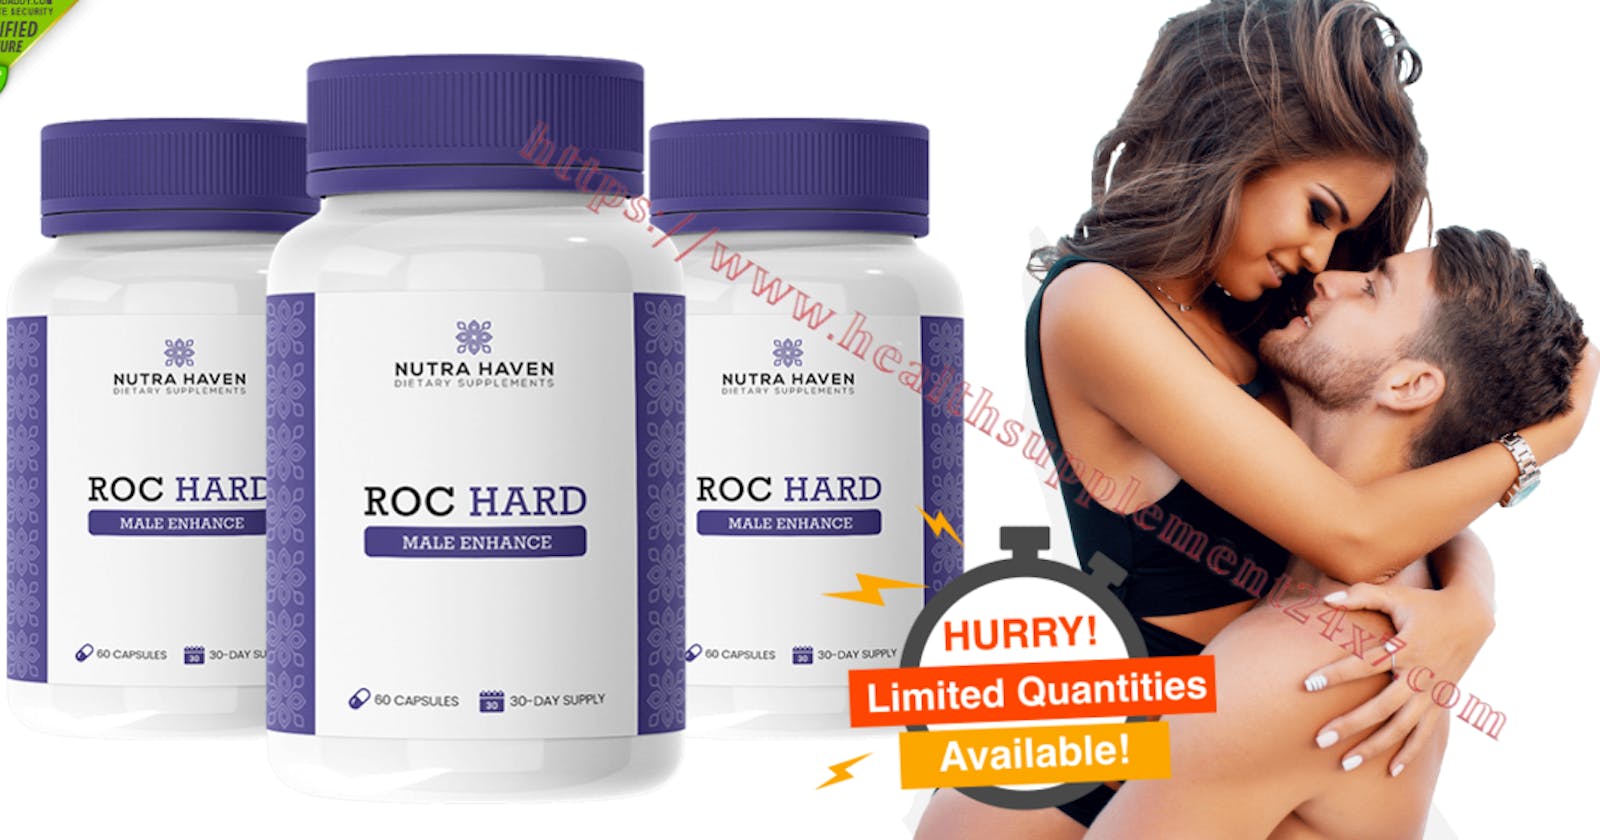 Roc Hard Male Enhancement {Nutra Haven Pills} Increase And Boost Sex Drive & Arousal With a Bigger Appetite(REAL OR HOAX)